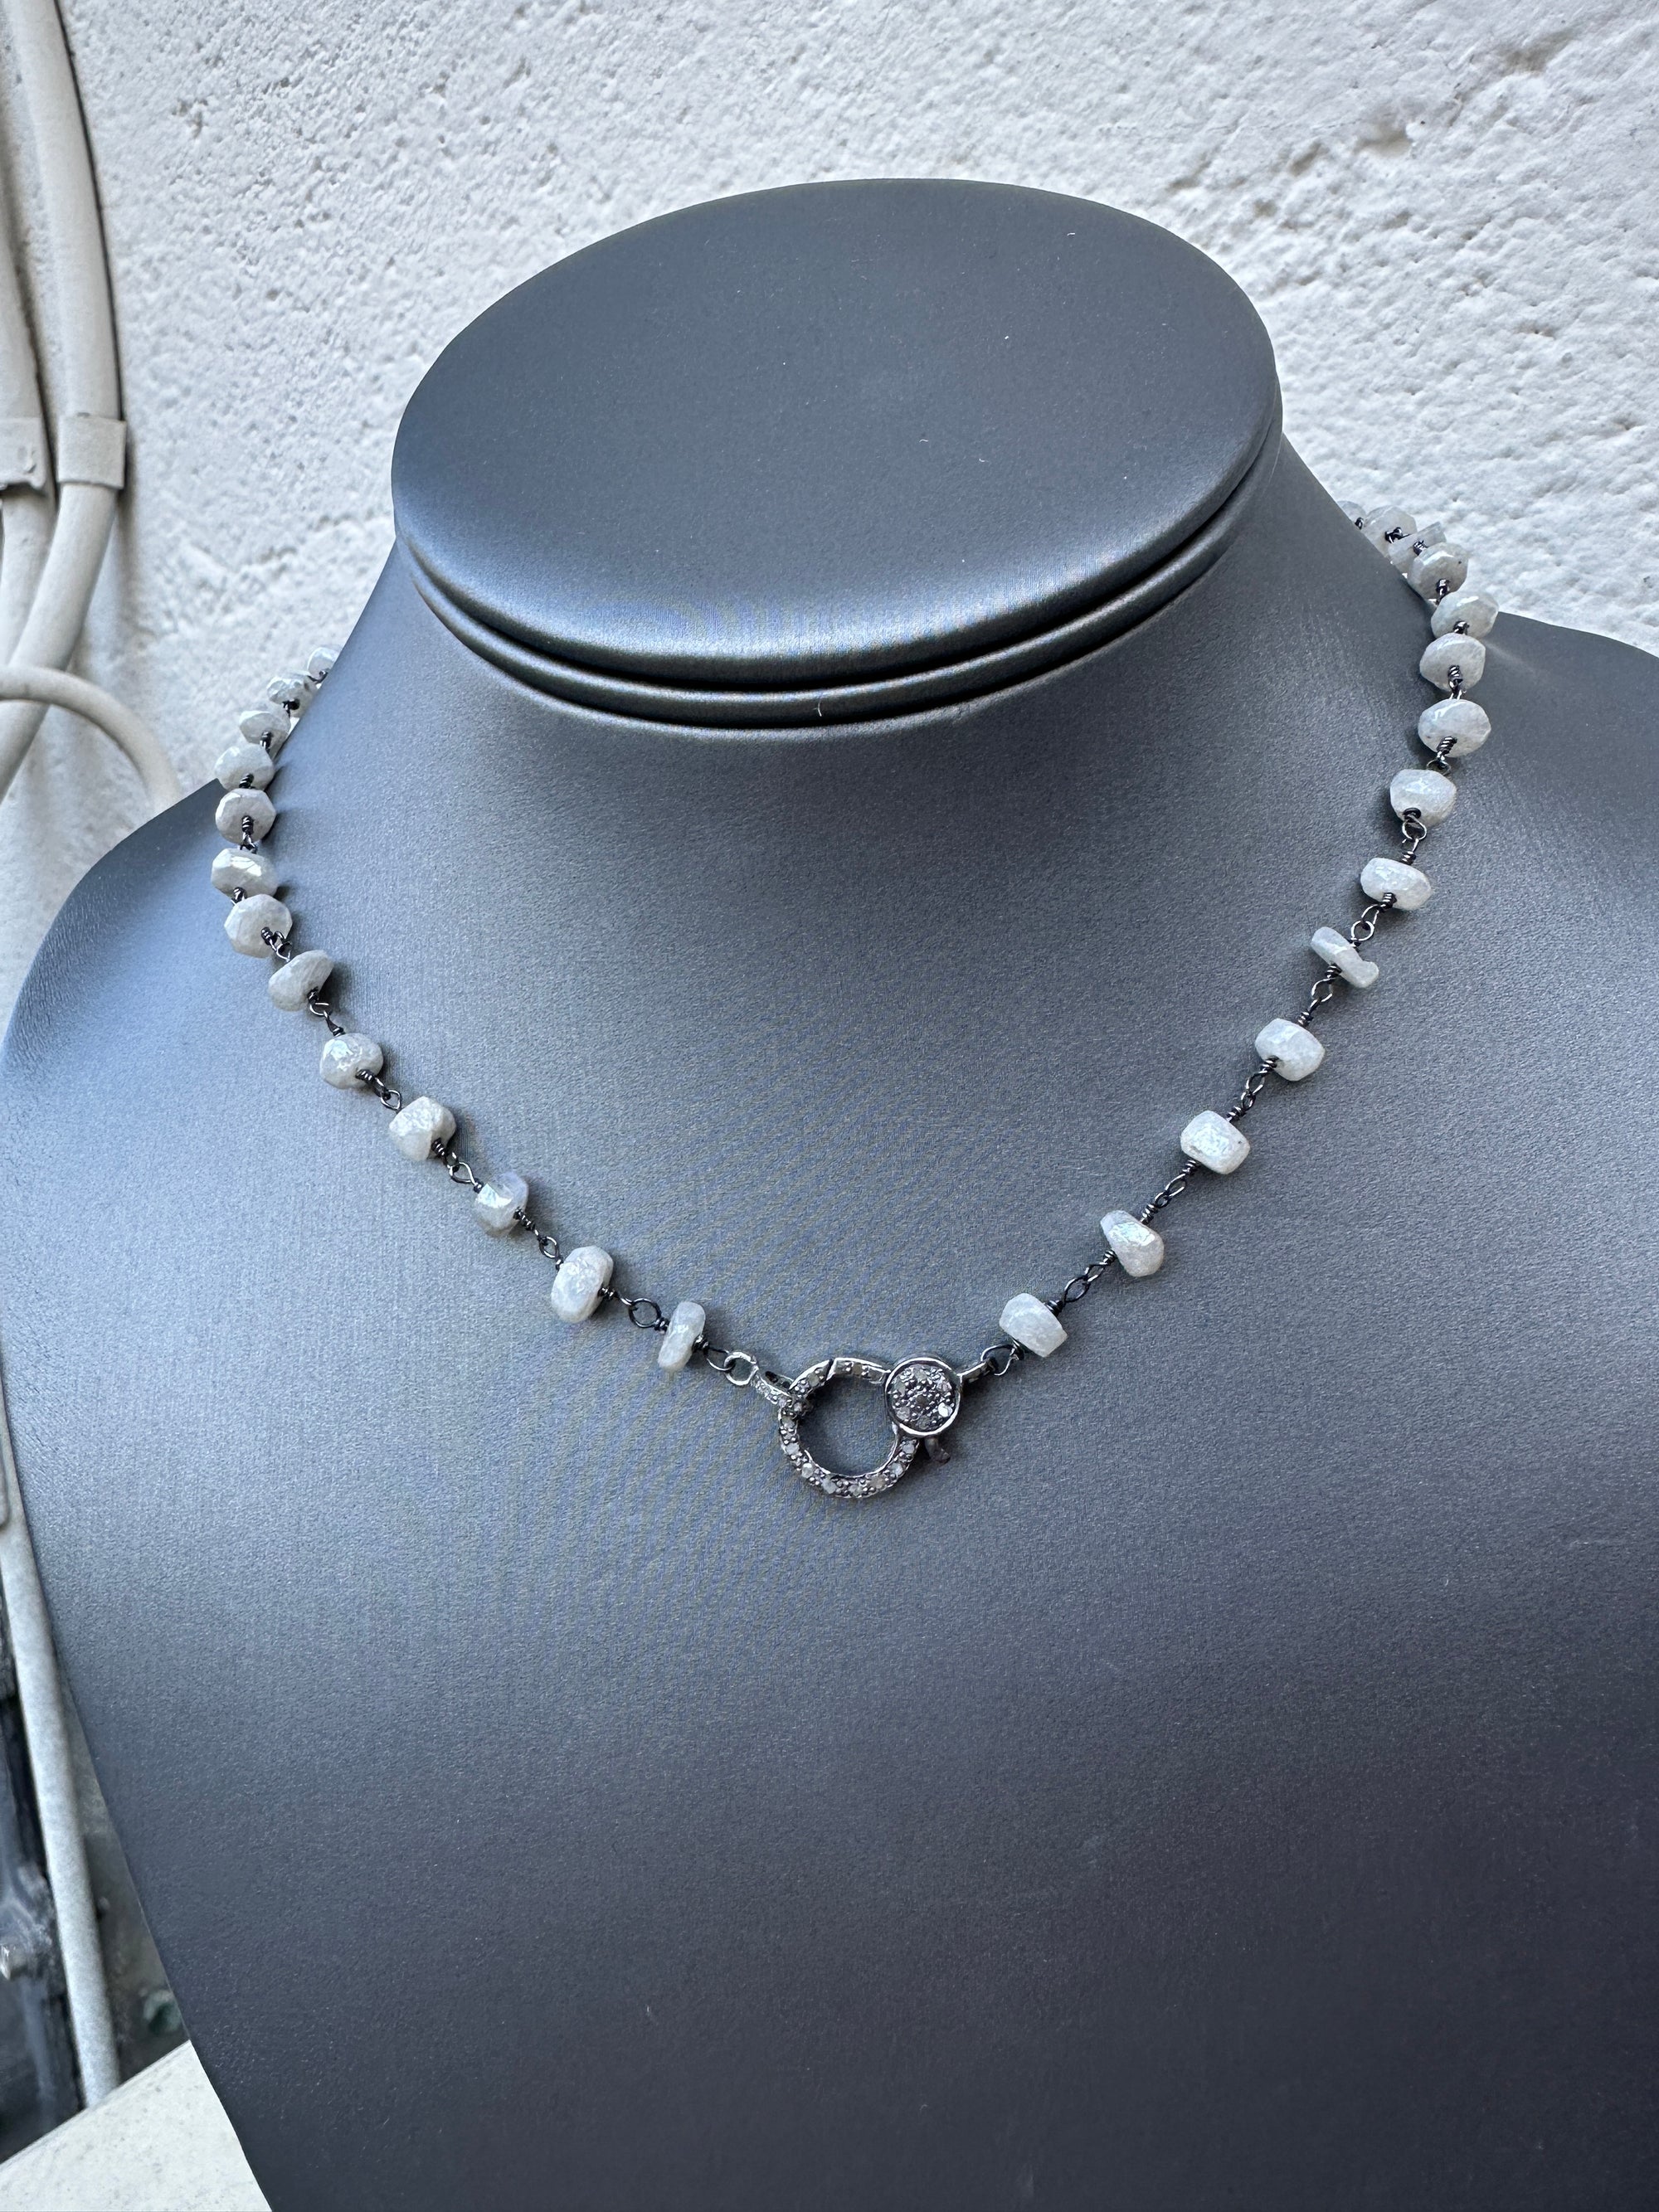 Moonstone & Pave Clasp Necklace